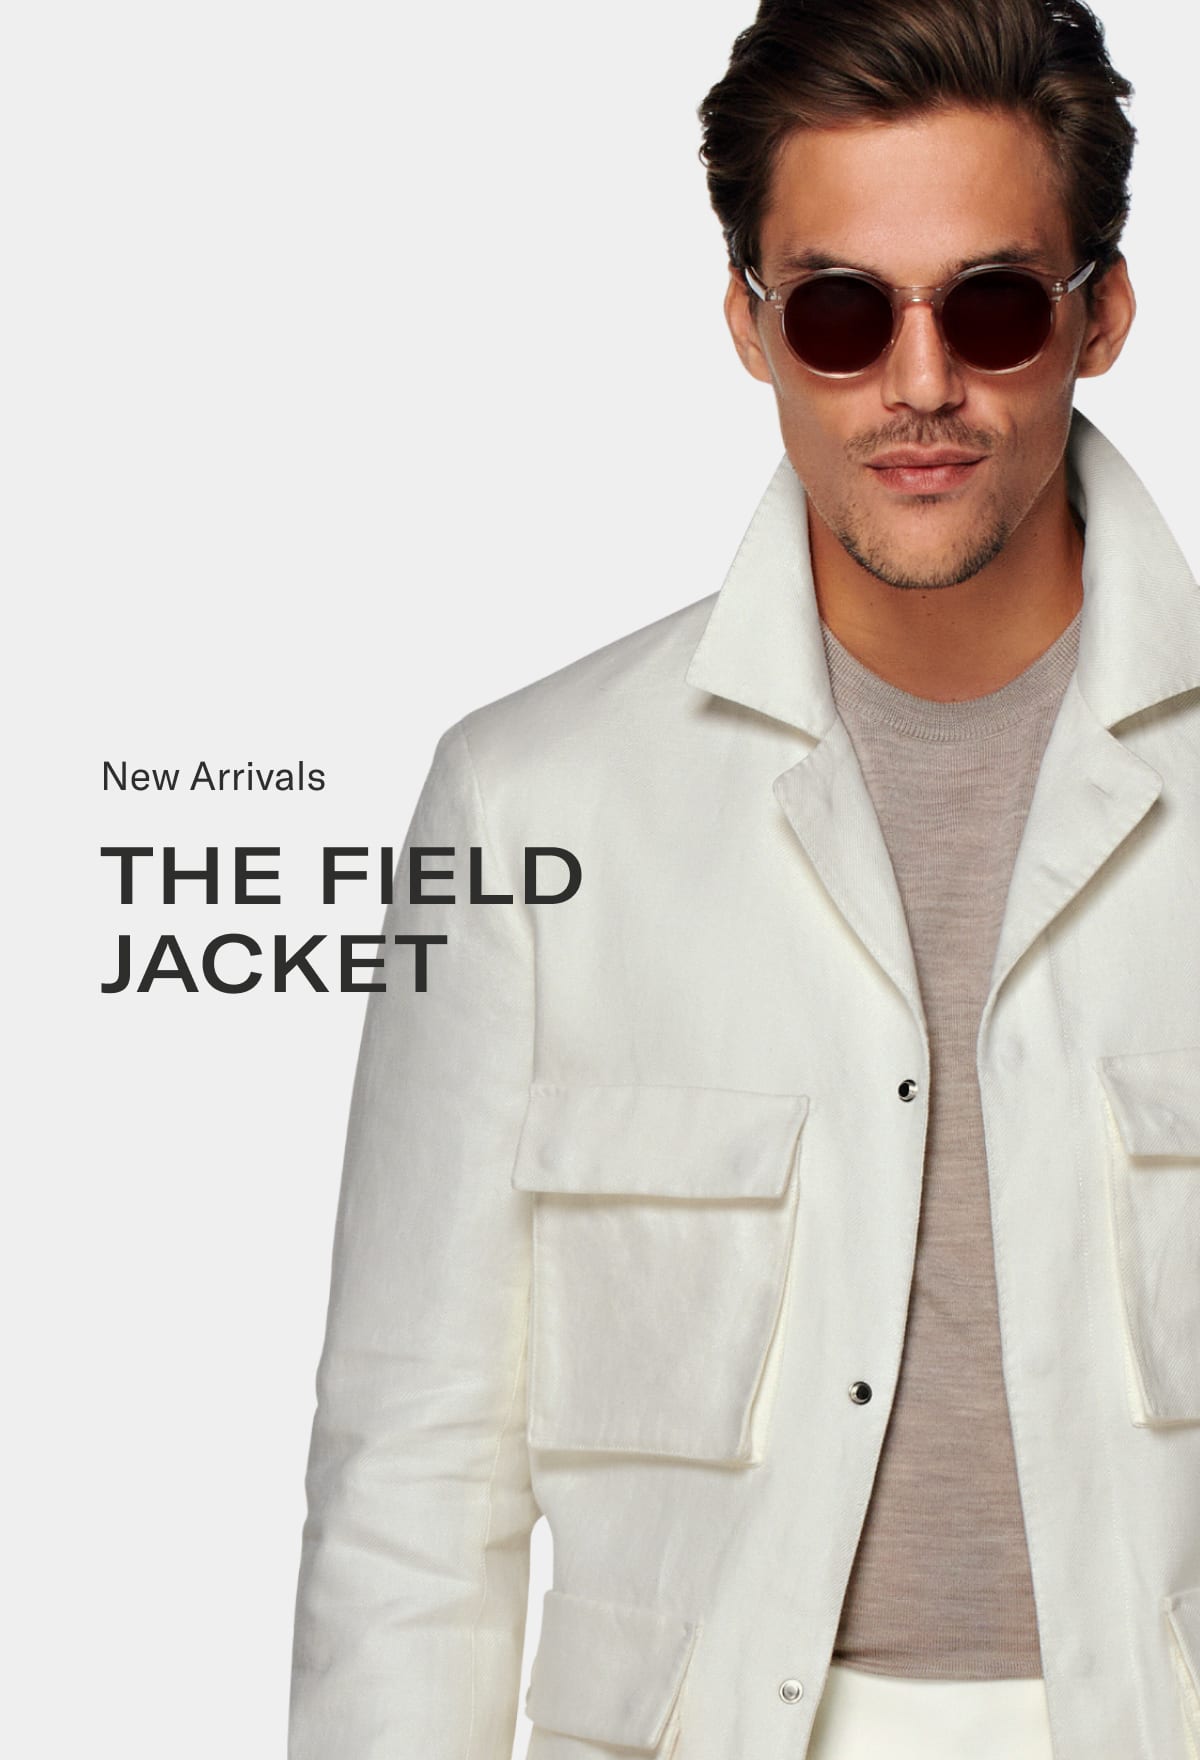 New Arrivals the Field Jacket